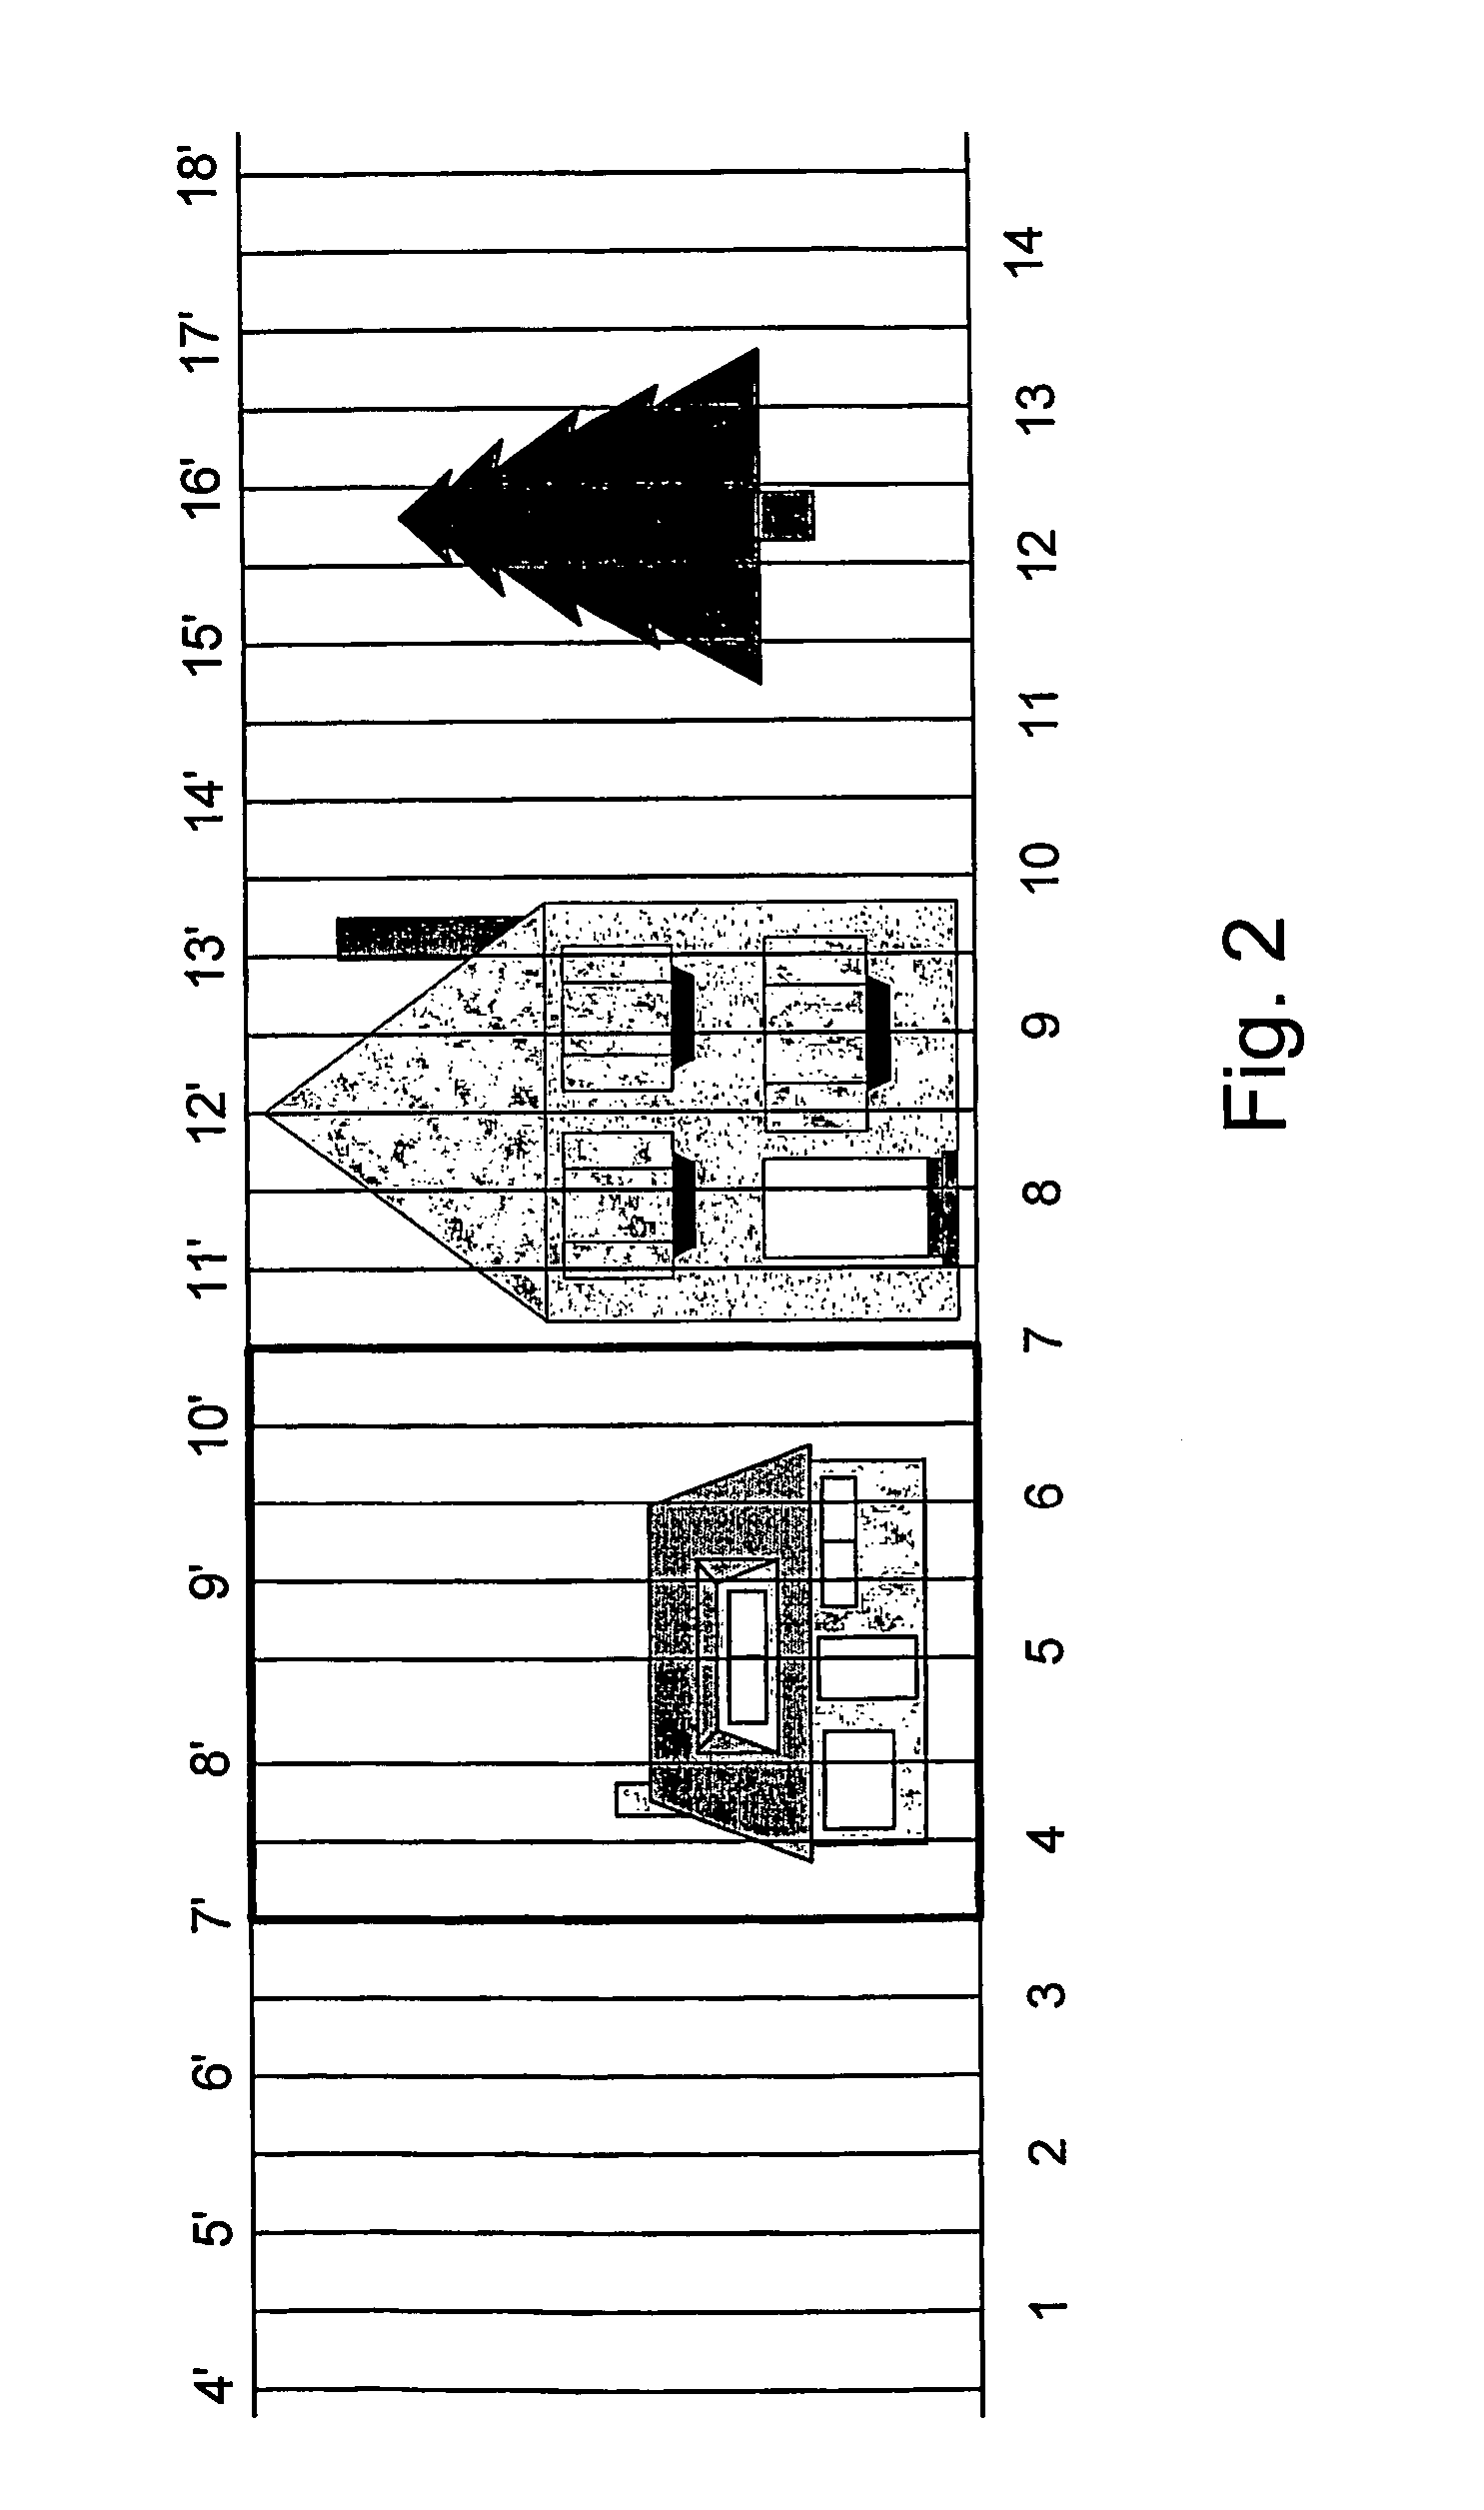 Method for producing stereoscopic images from monoscopic images